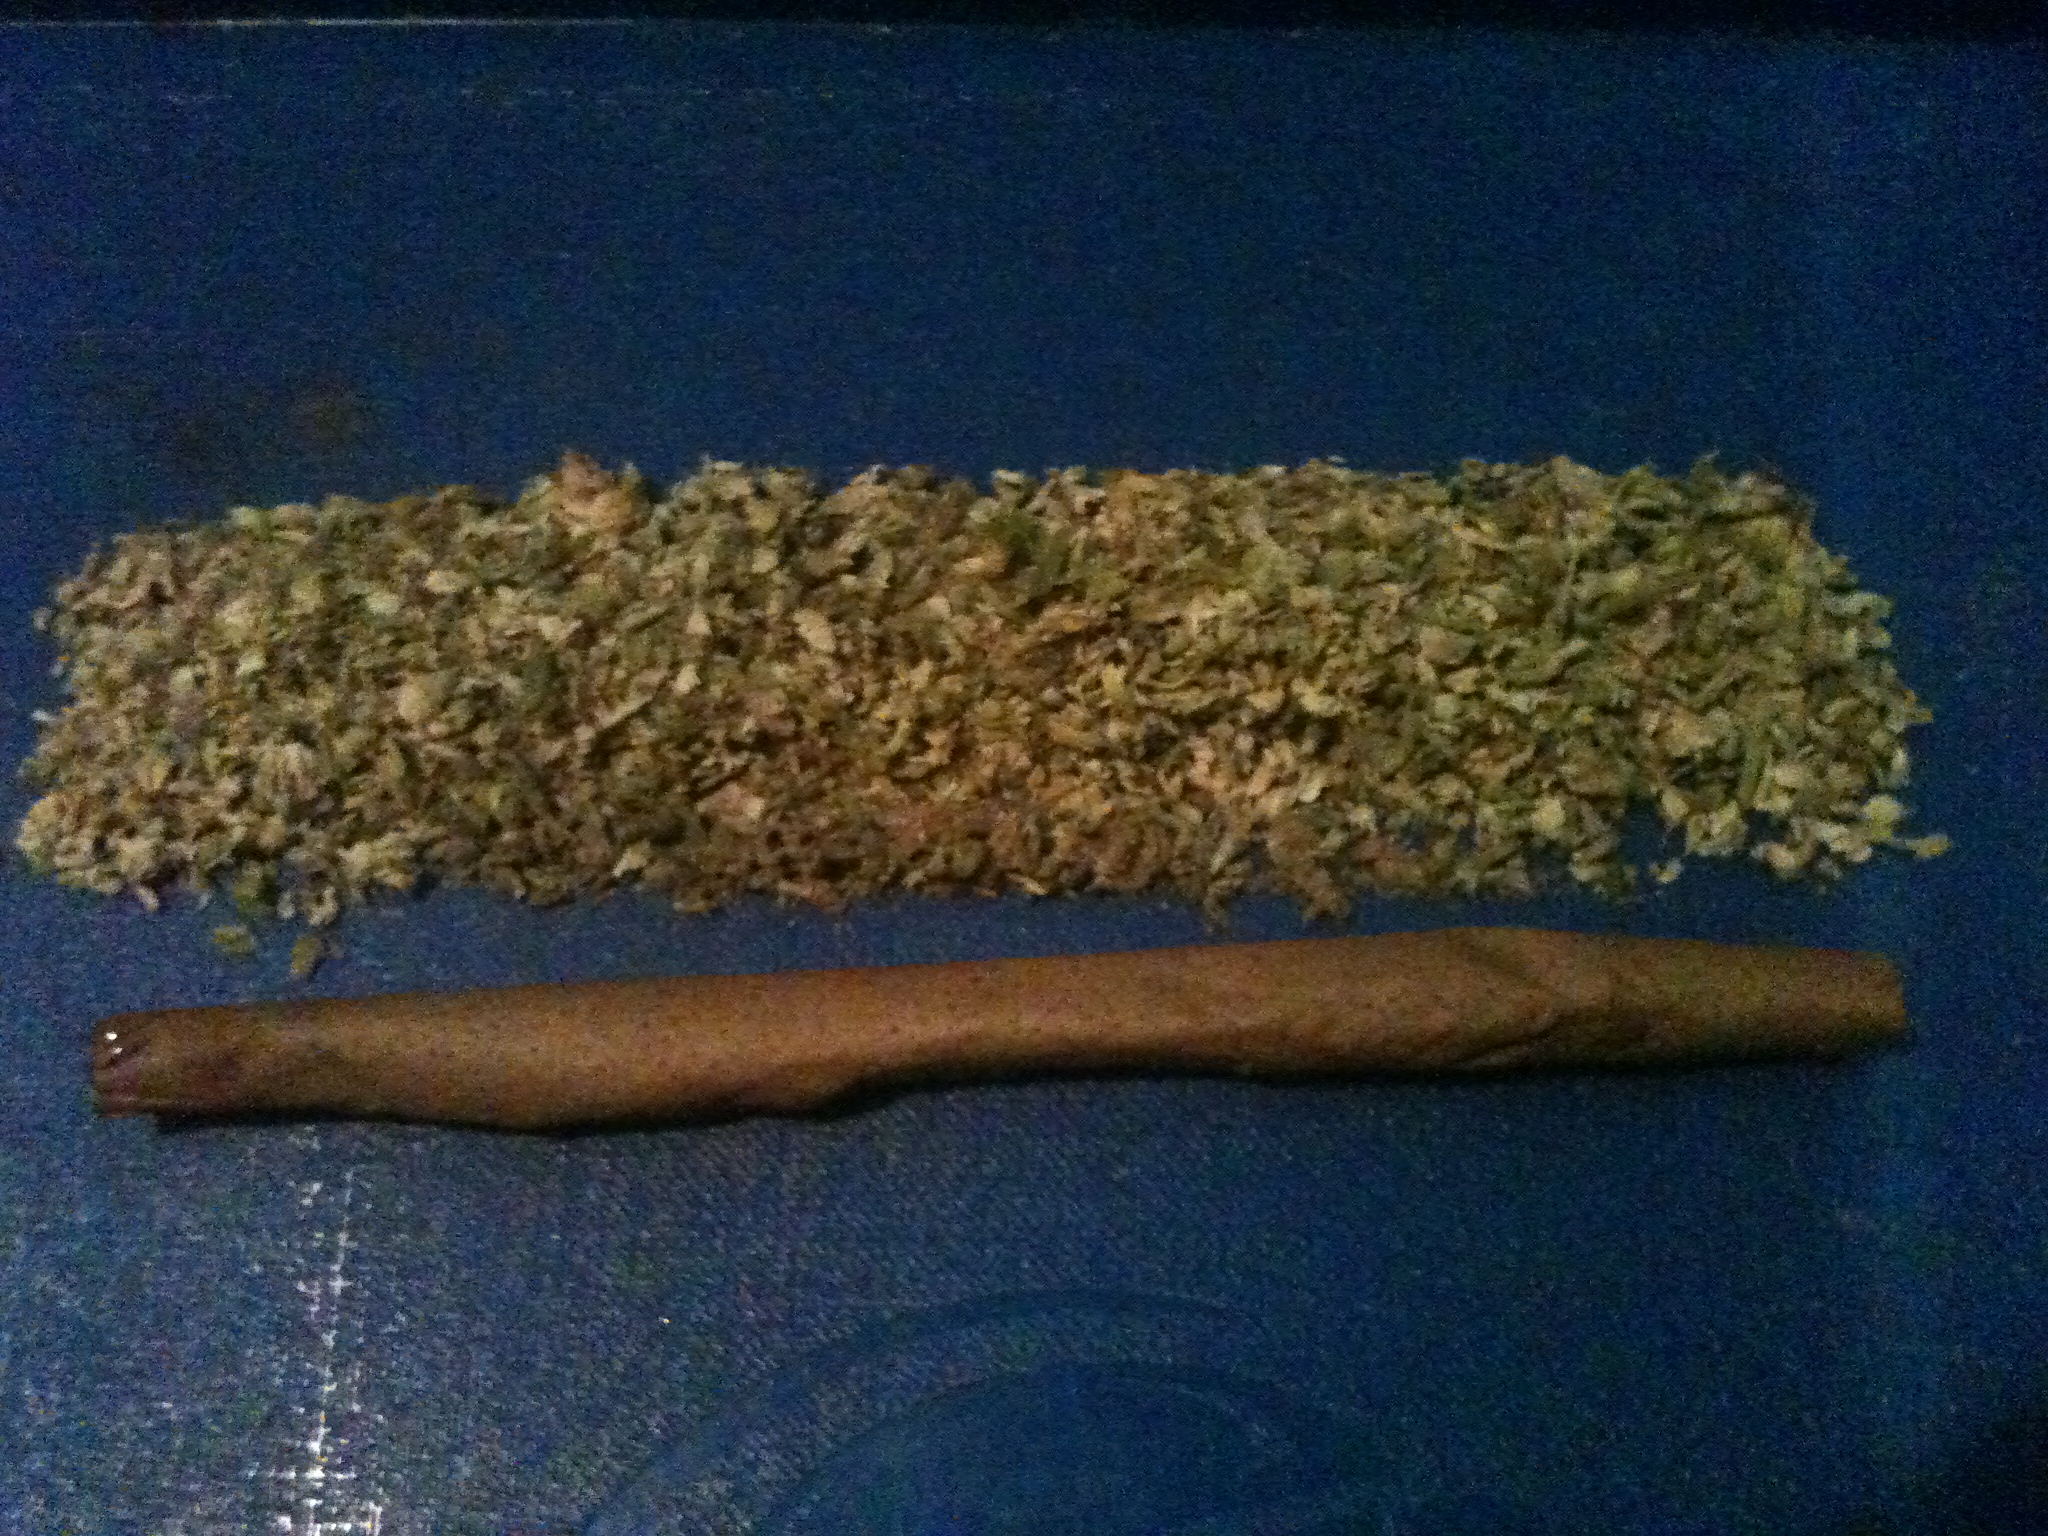 Inner Blunt w/ bud for the second layer